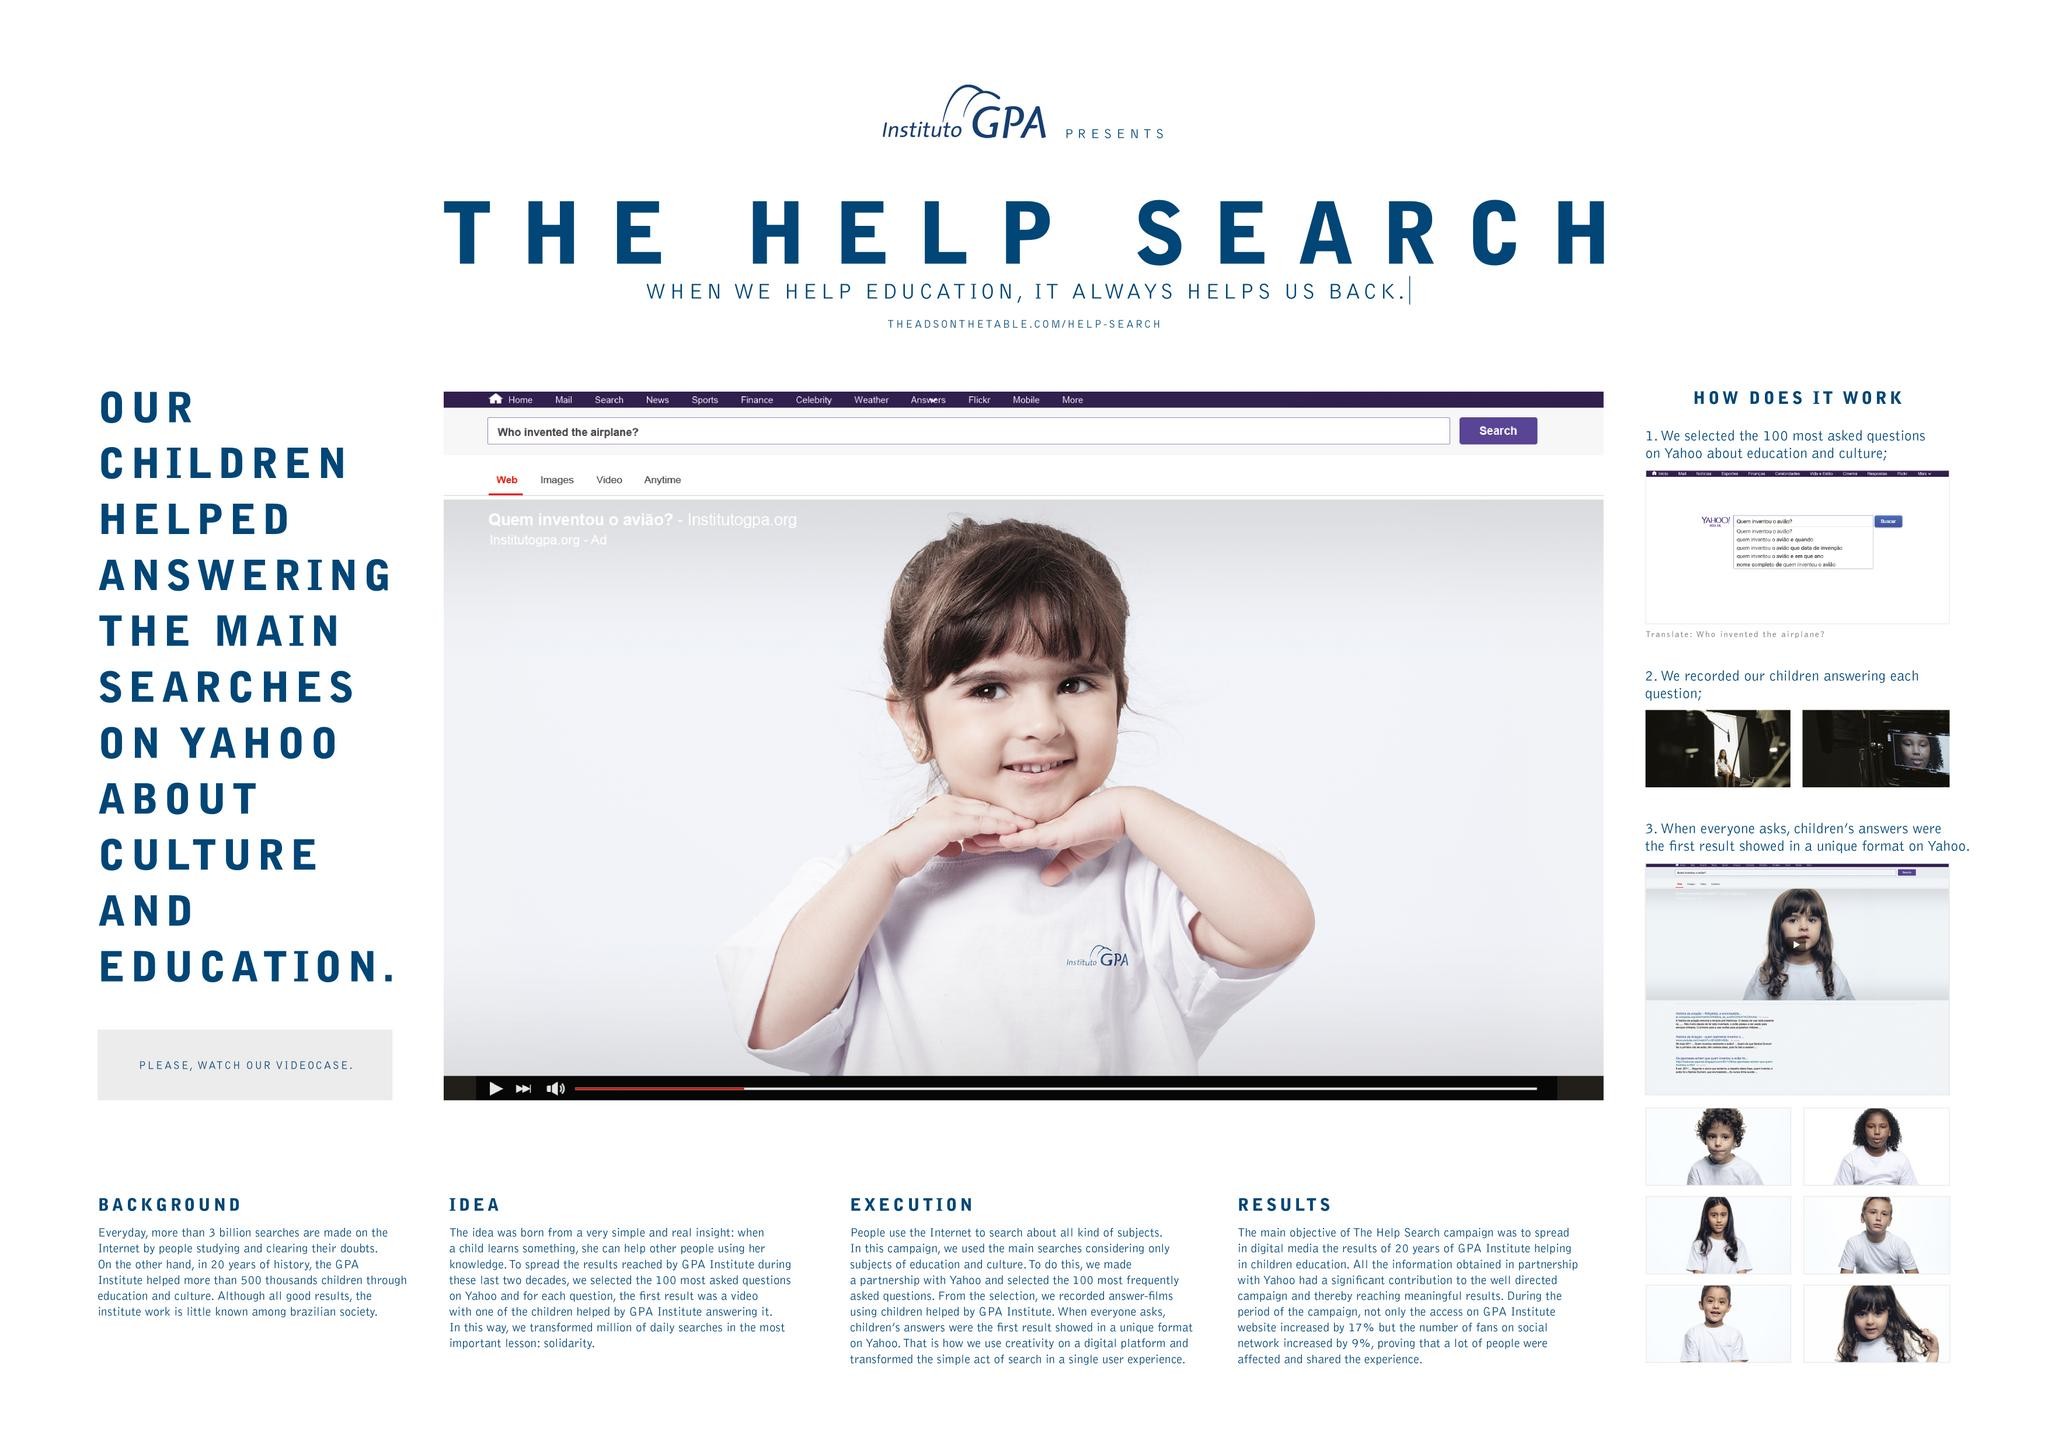 The Help Search